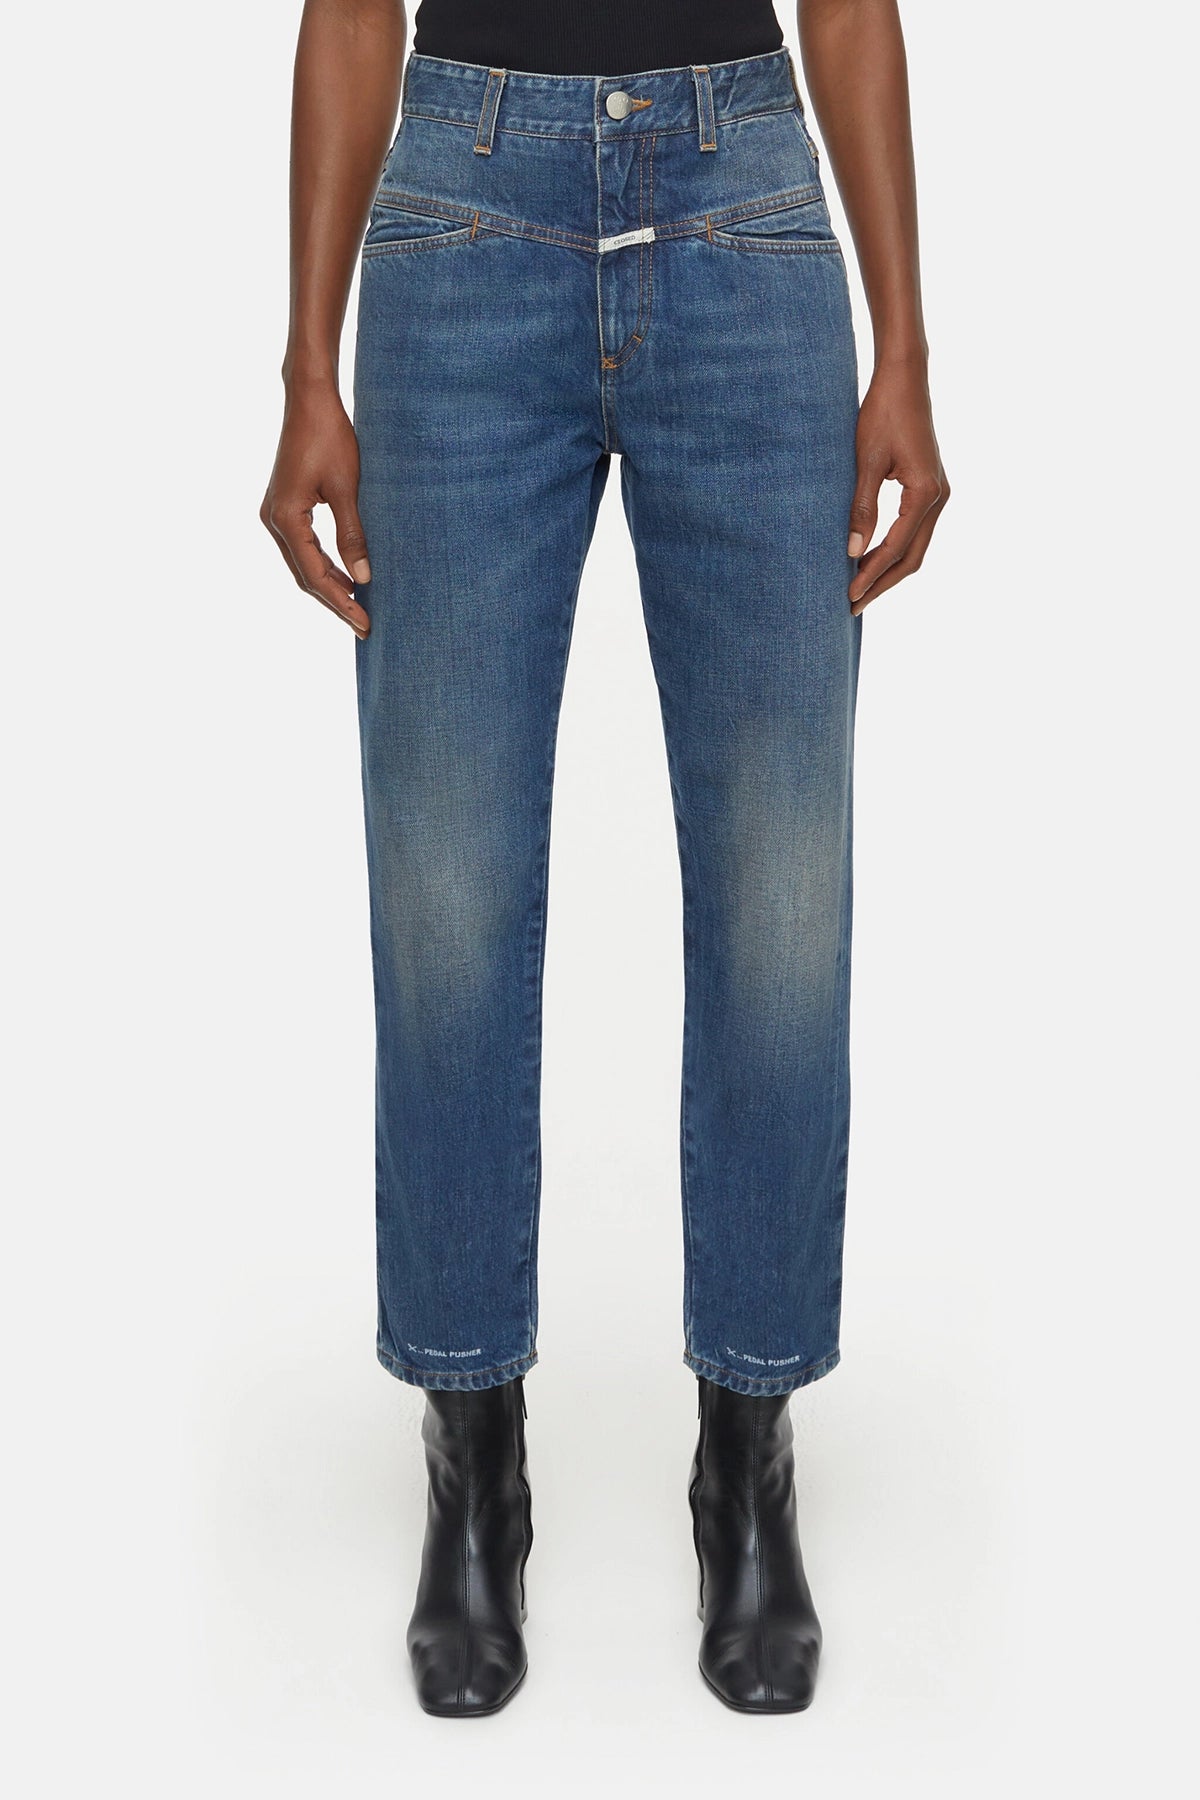 Closed Pedal Pusher Jeans